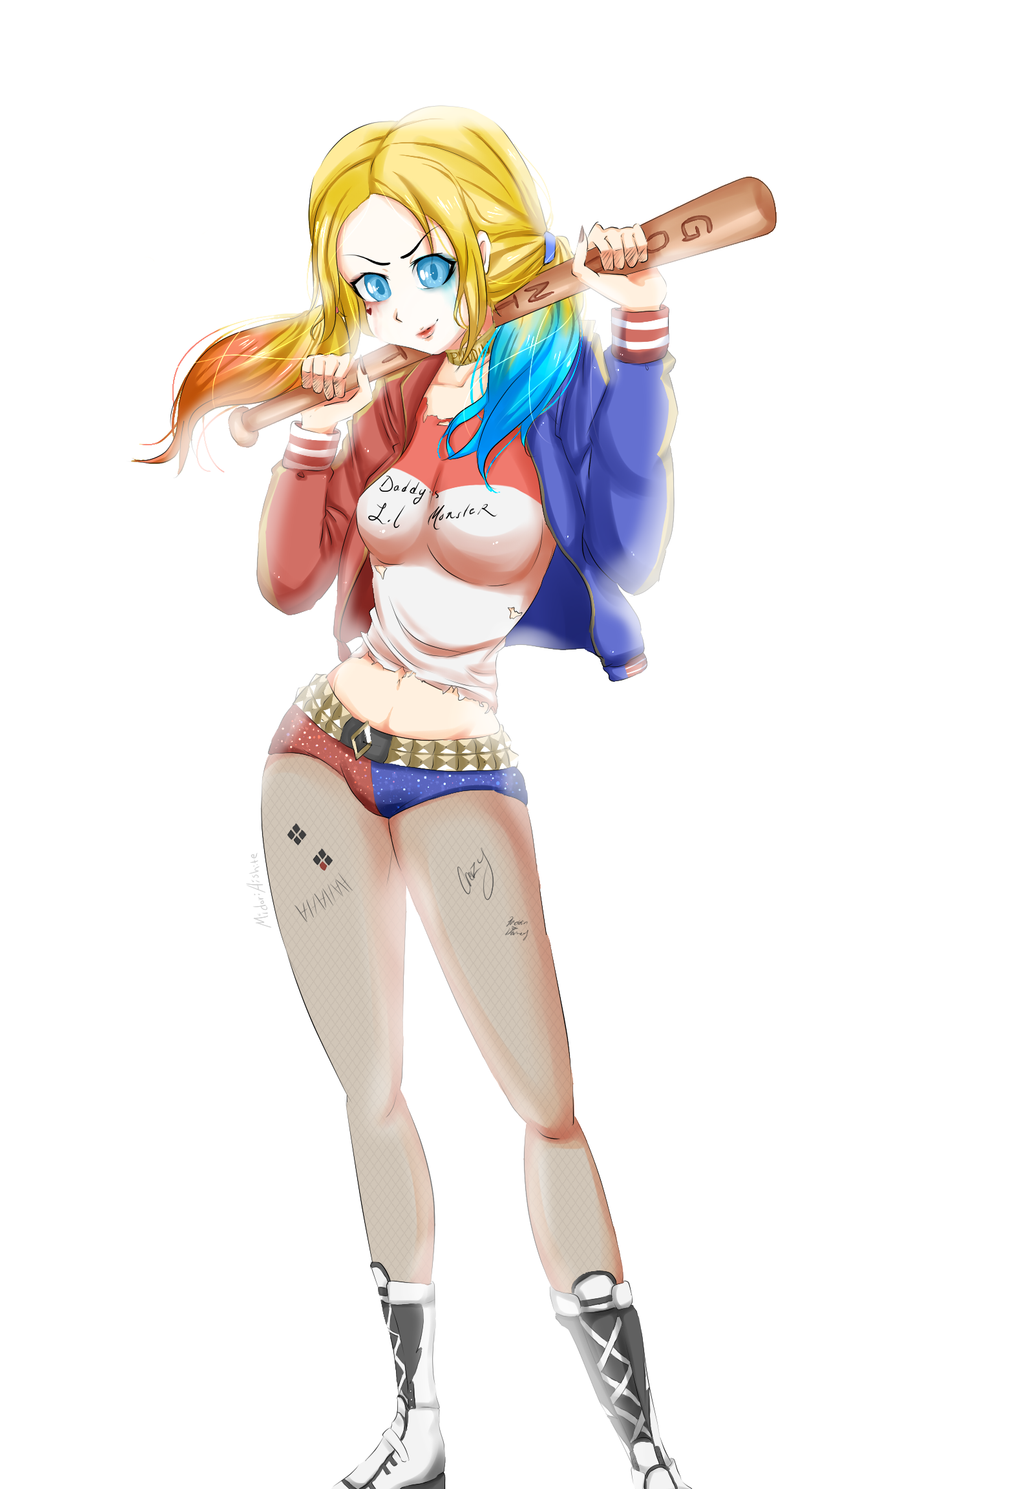 harley_quinn____suicide_squad_by_midoriaishite-d8t92h2.png